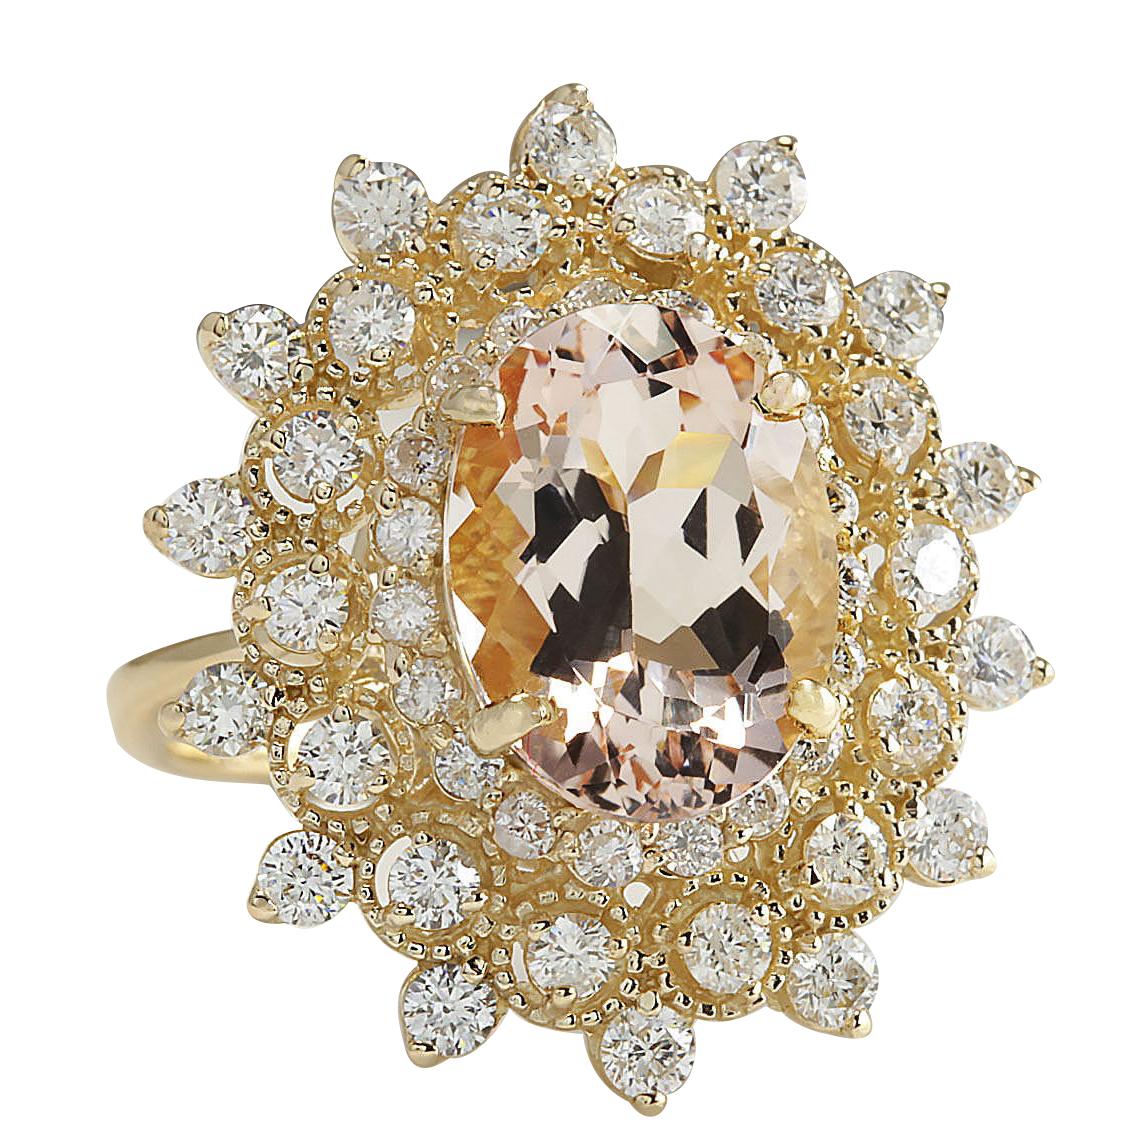 Stamped: 14K Yellow Gold
Total Ring Weight: 7.5 Grams
Morganite Weight is 4.60 Carat (Measures: 12.00x10.00 mm)
Diamond Weight is 1.73 Carats
Color: F-G, Clarity: VS2-SI1
Face Measures: 26.00x22.70 mm
Sku: [702566W]